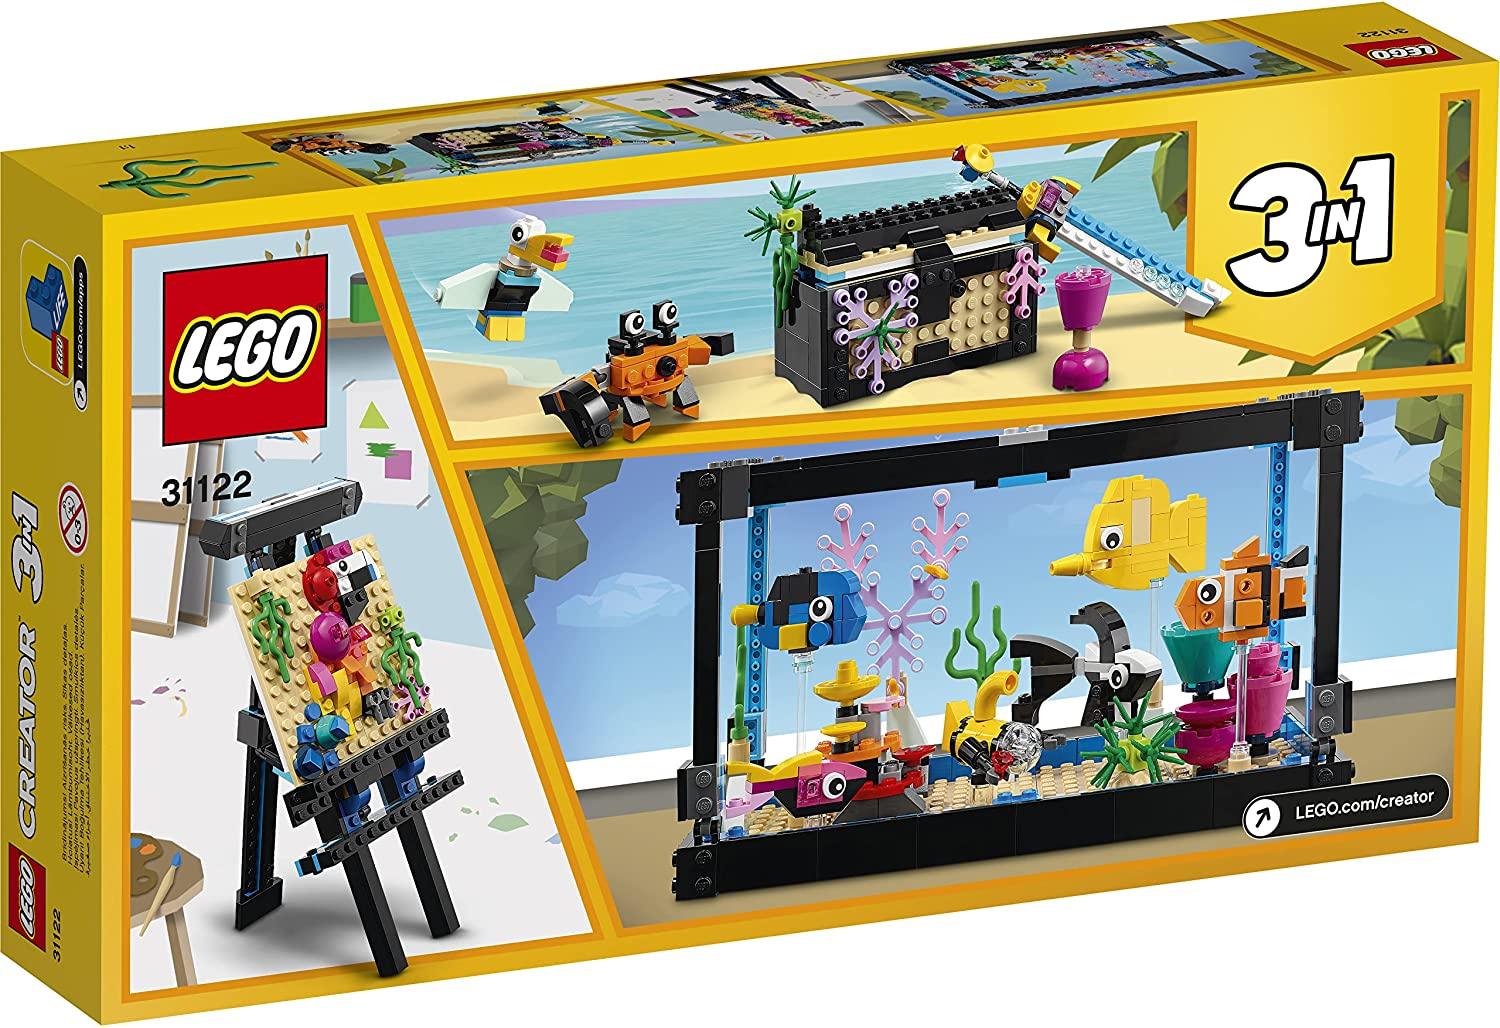 LEGO Creator 3in1 Fish Tank Building Kit for Ages 8+ - FunCorp India